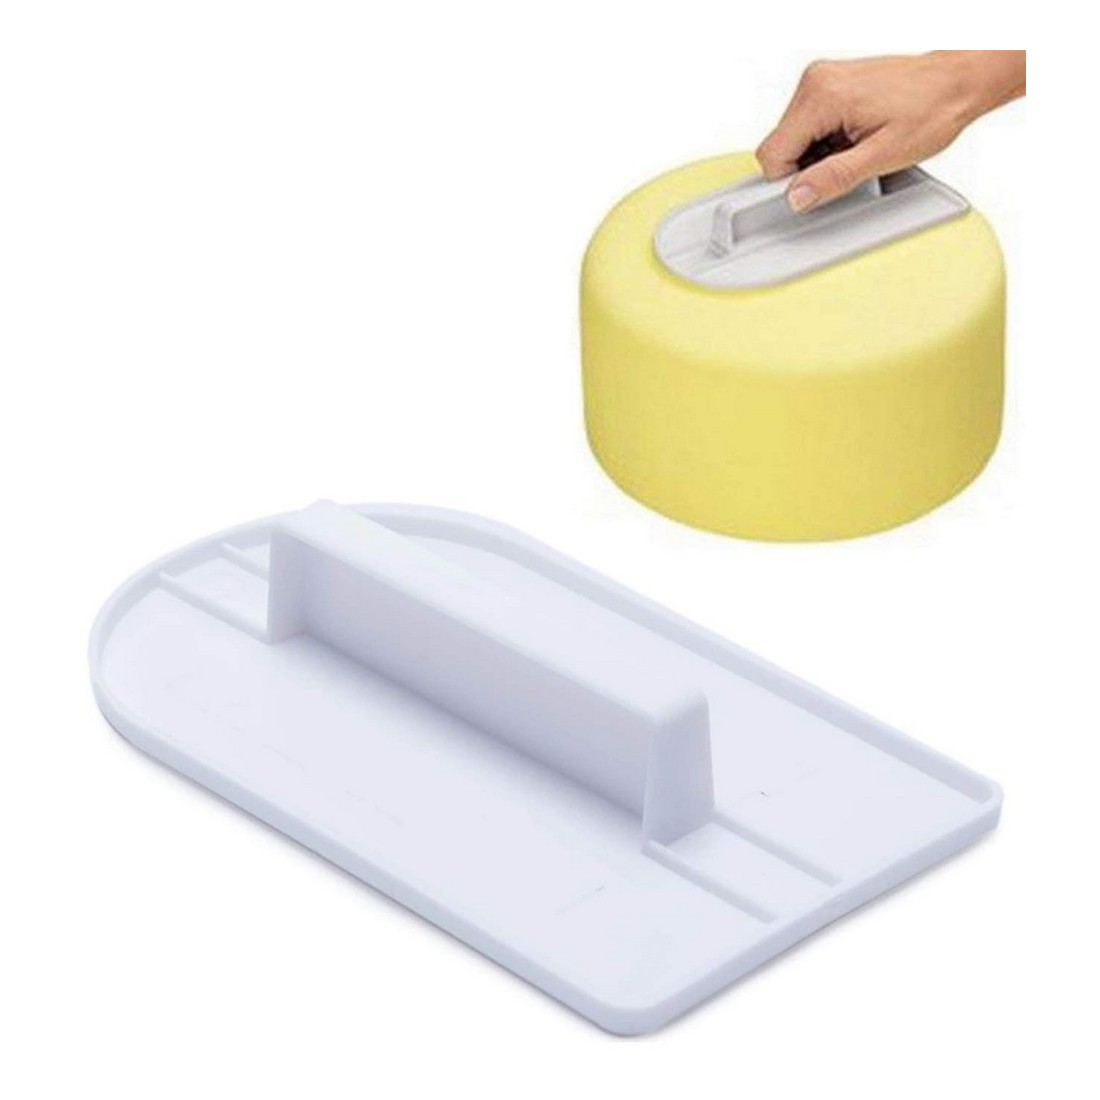 Cake Icing Smoother Tool - Inspire Uplift